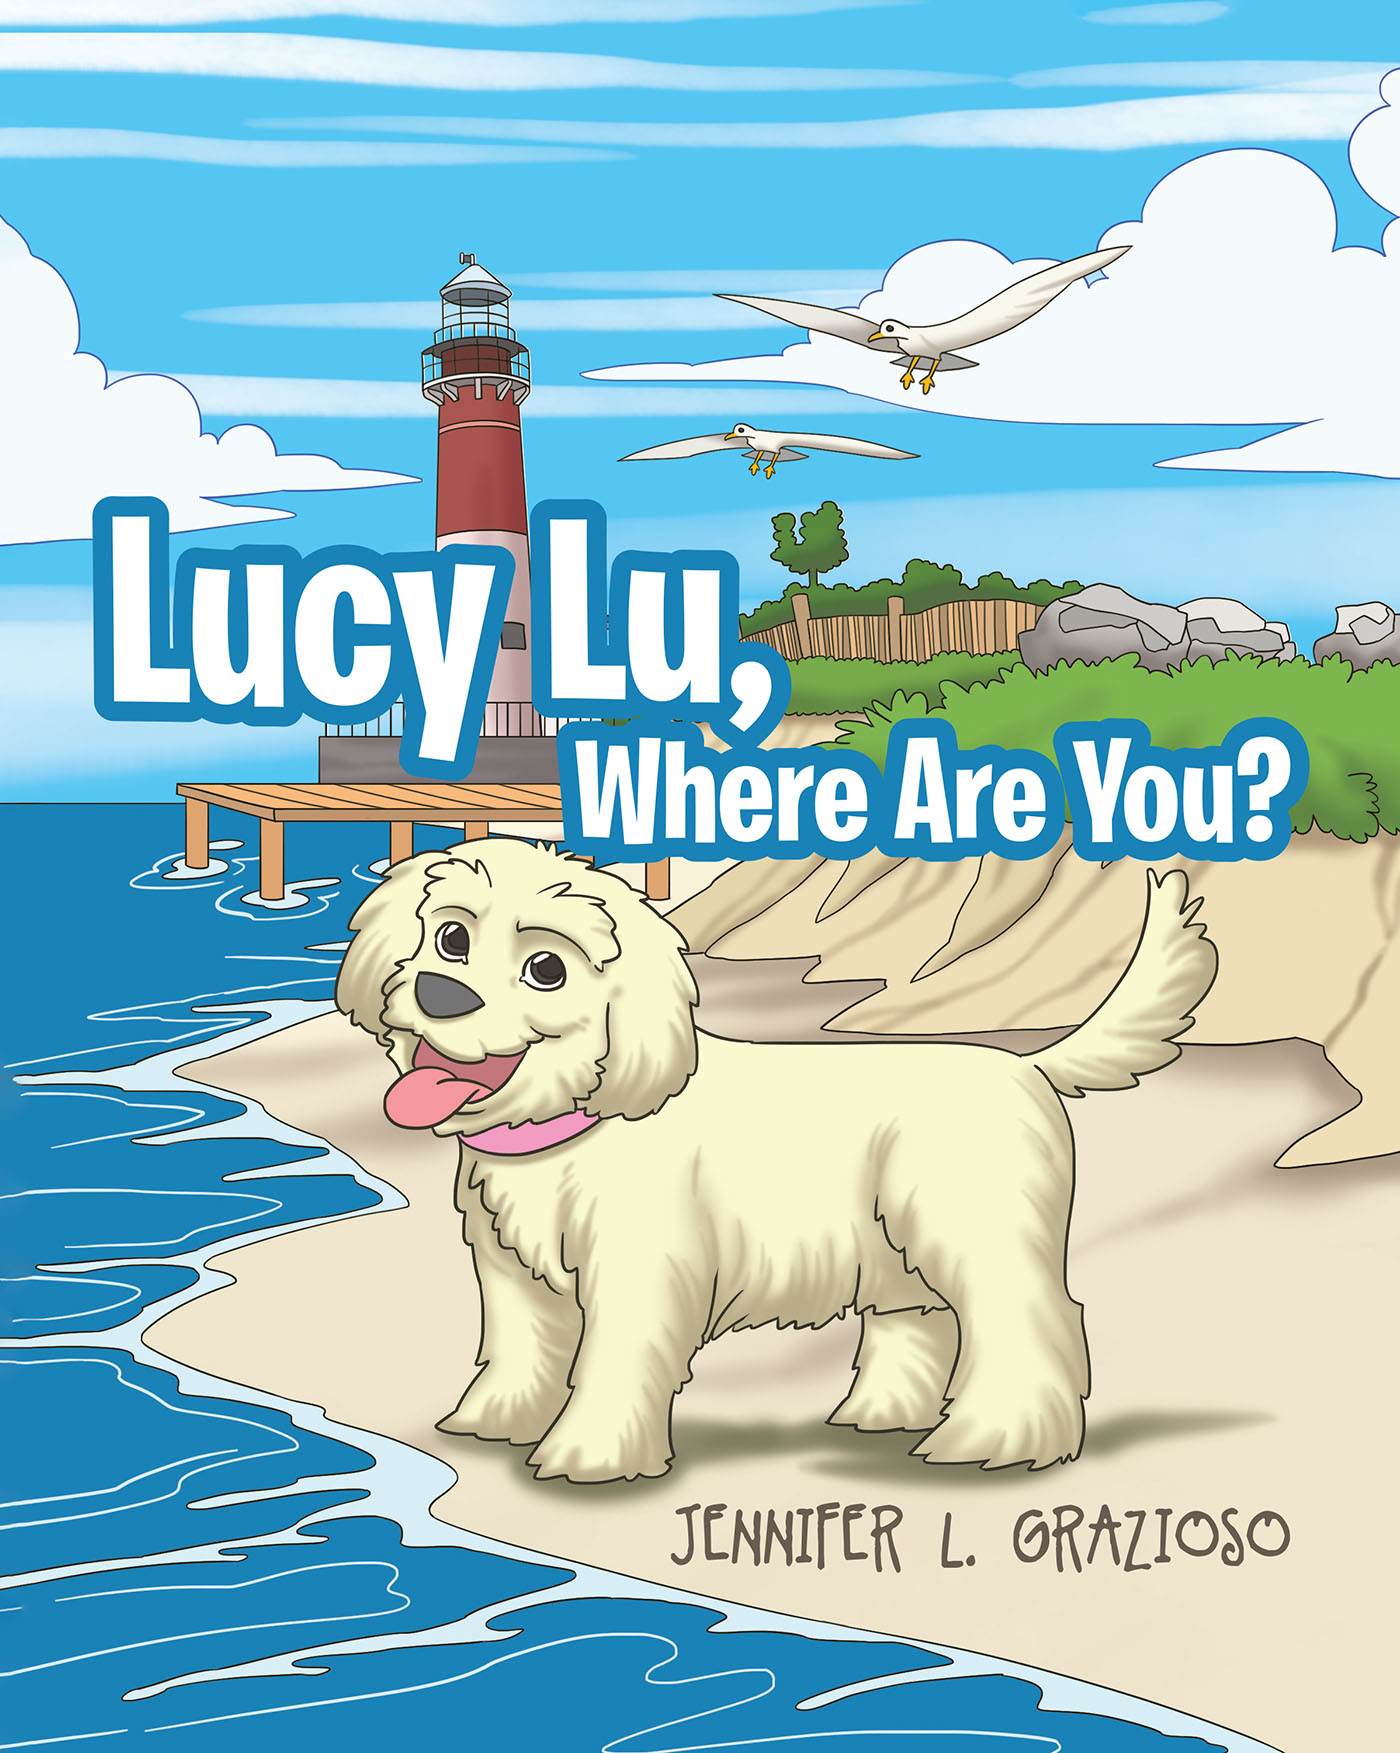 Lucy Lu, Where Are You? Cover Image